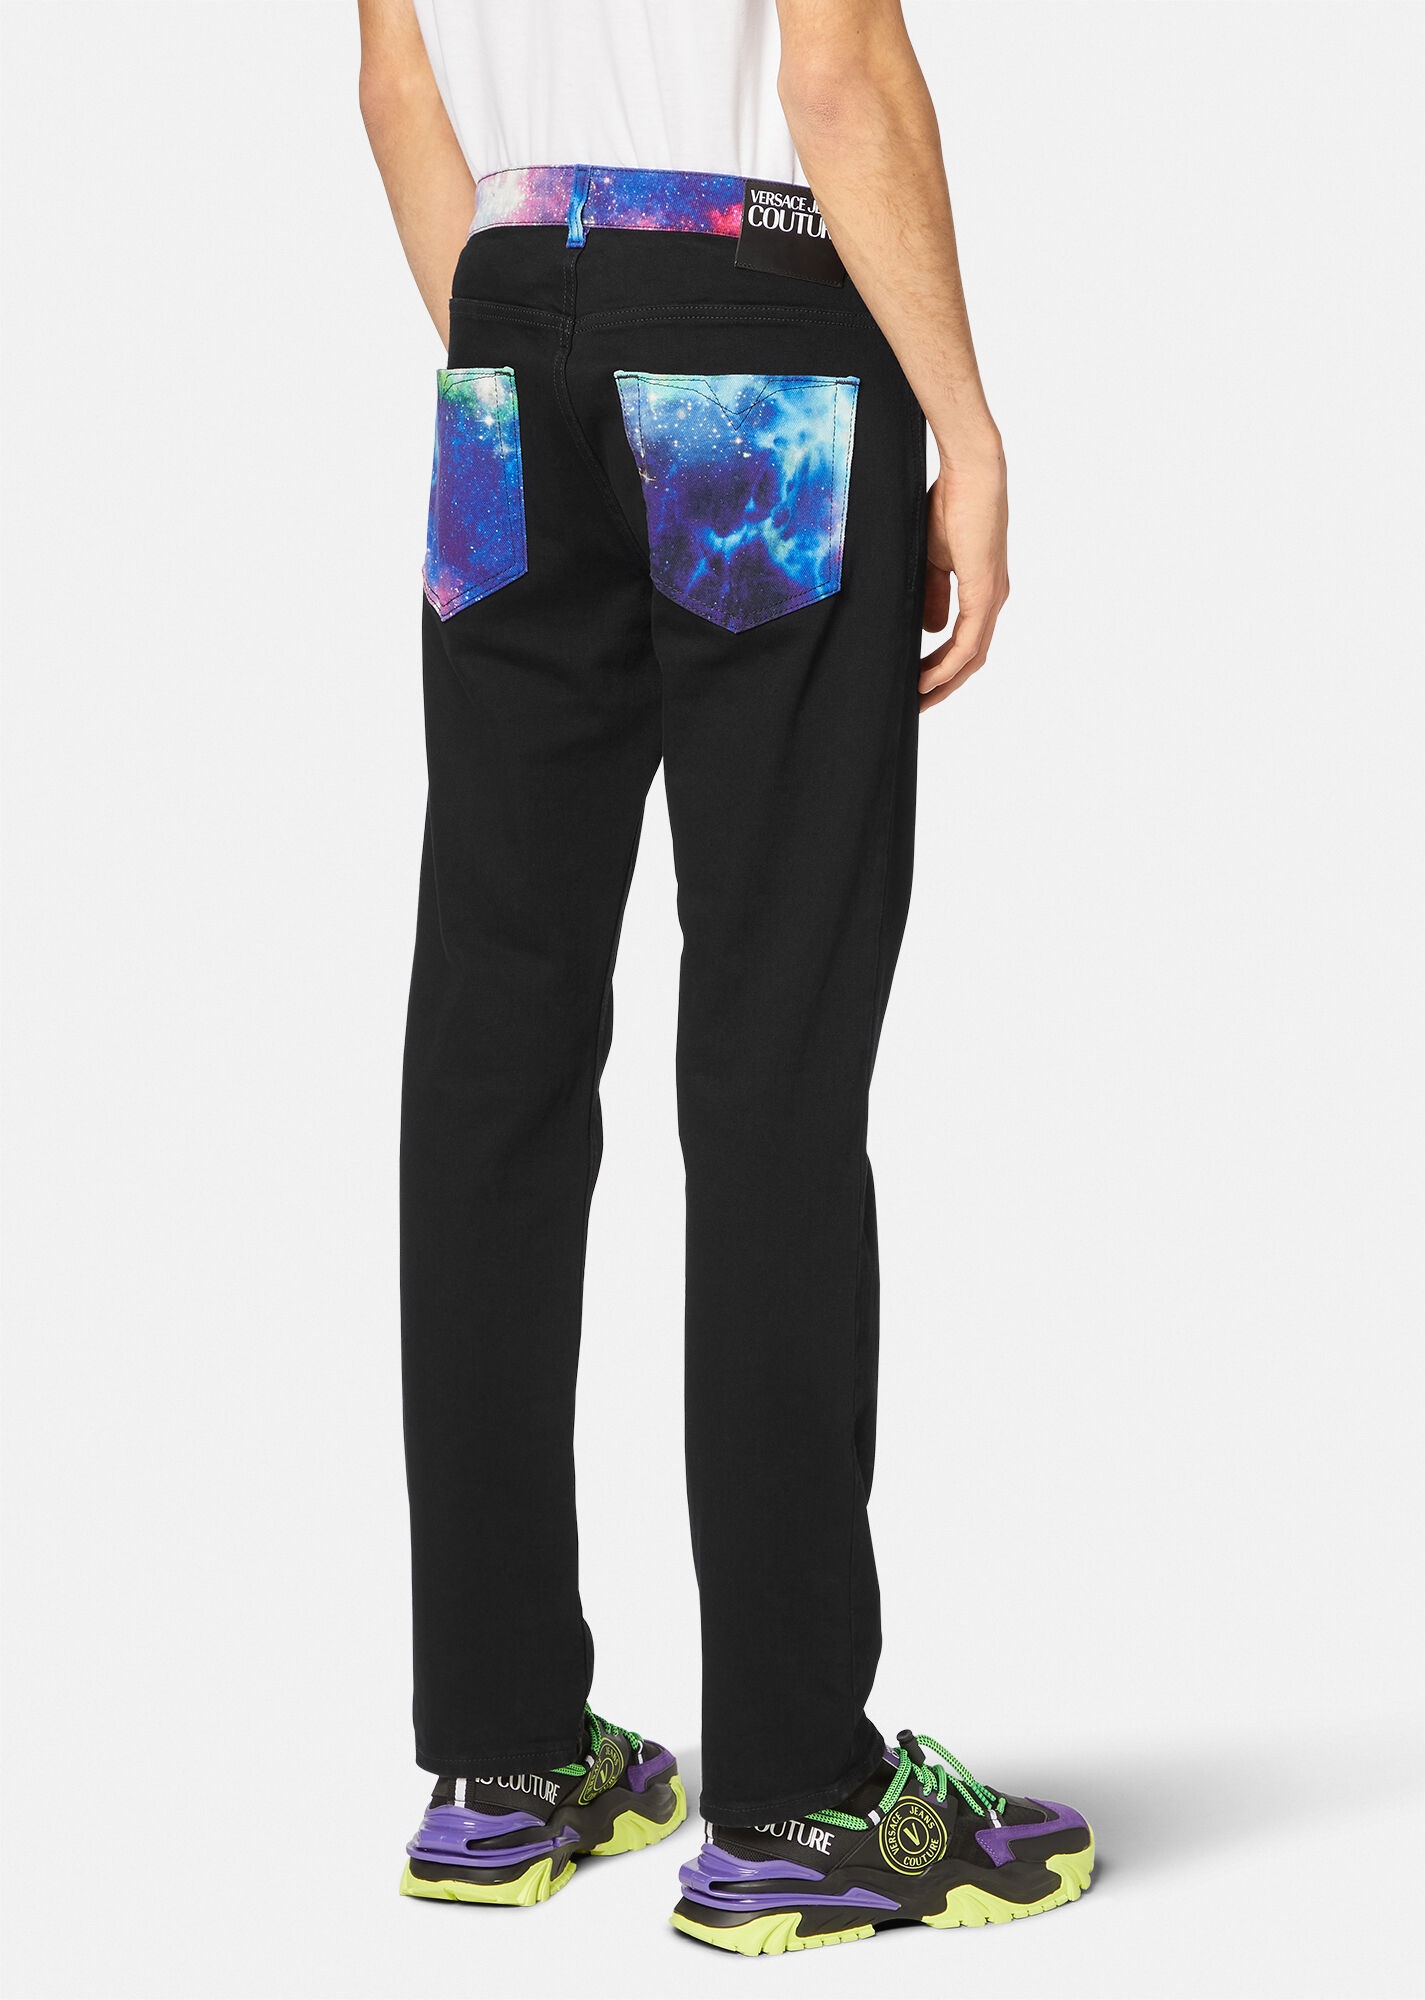 Space Couture Jeans - 4